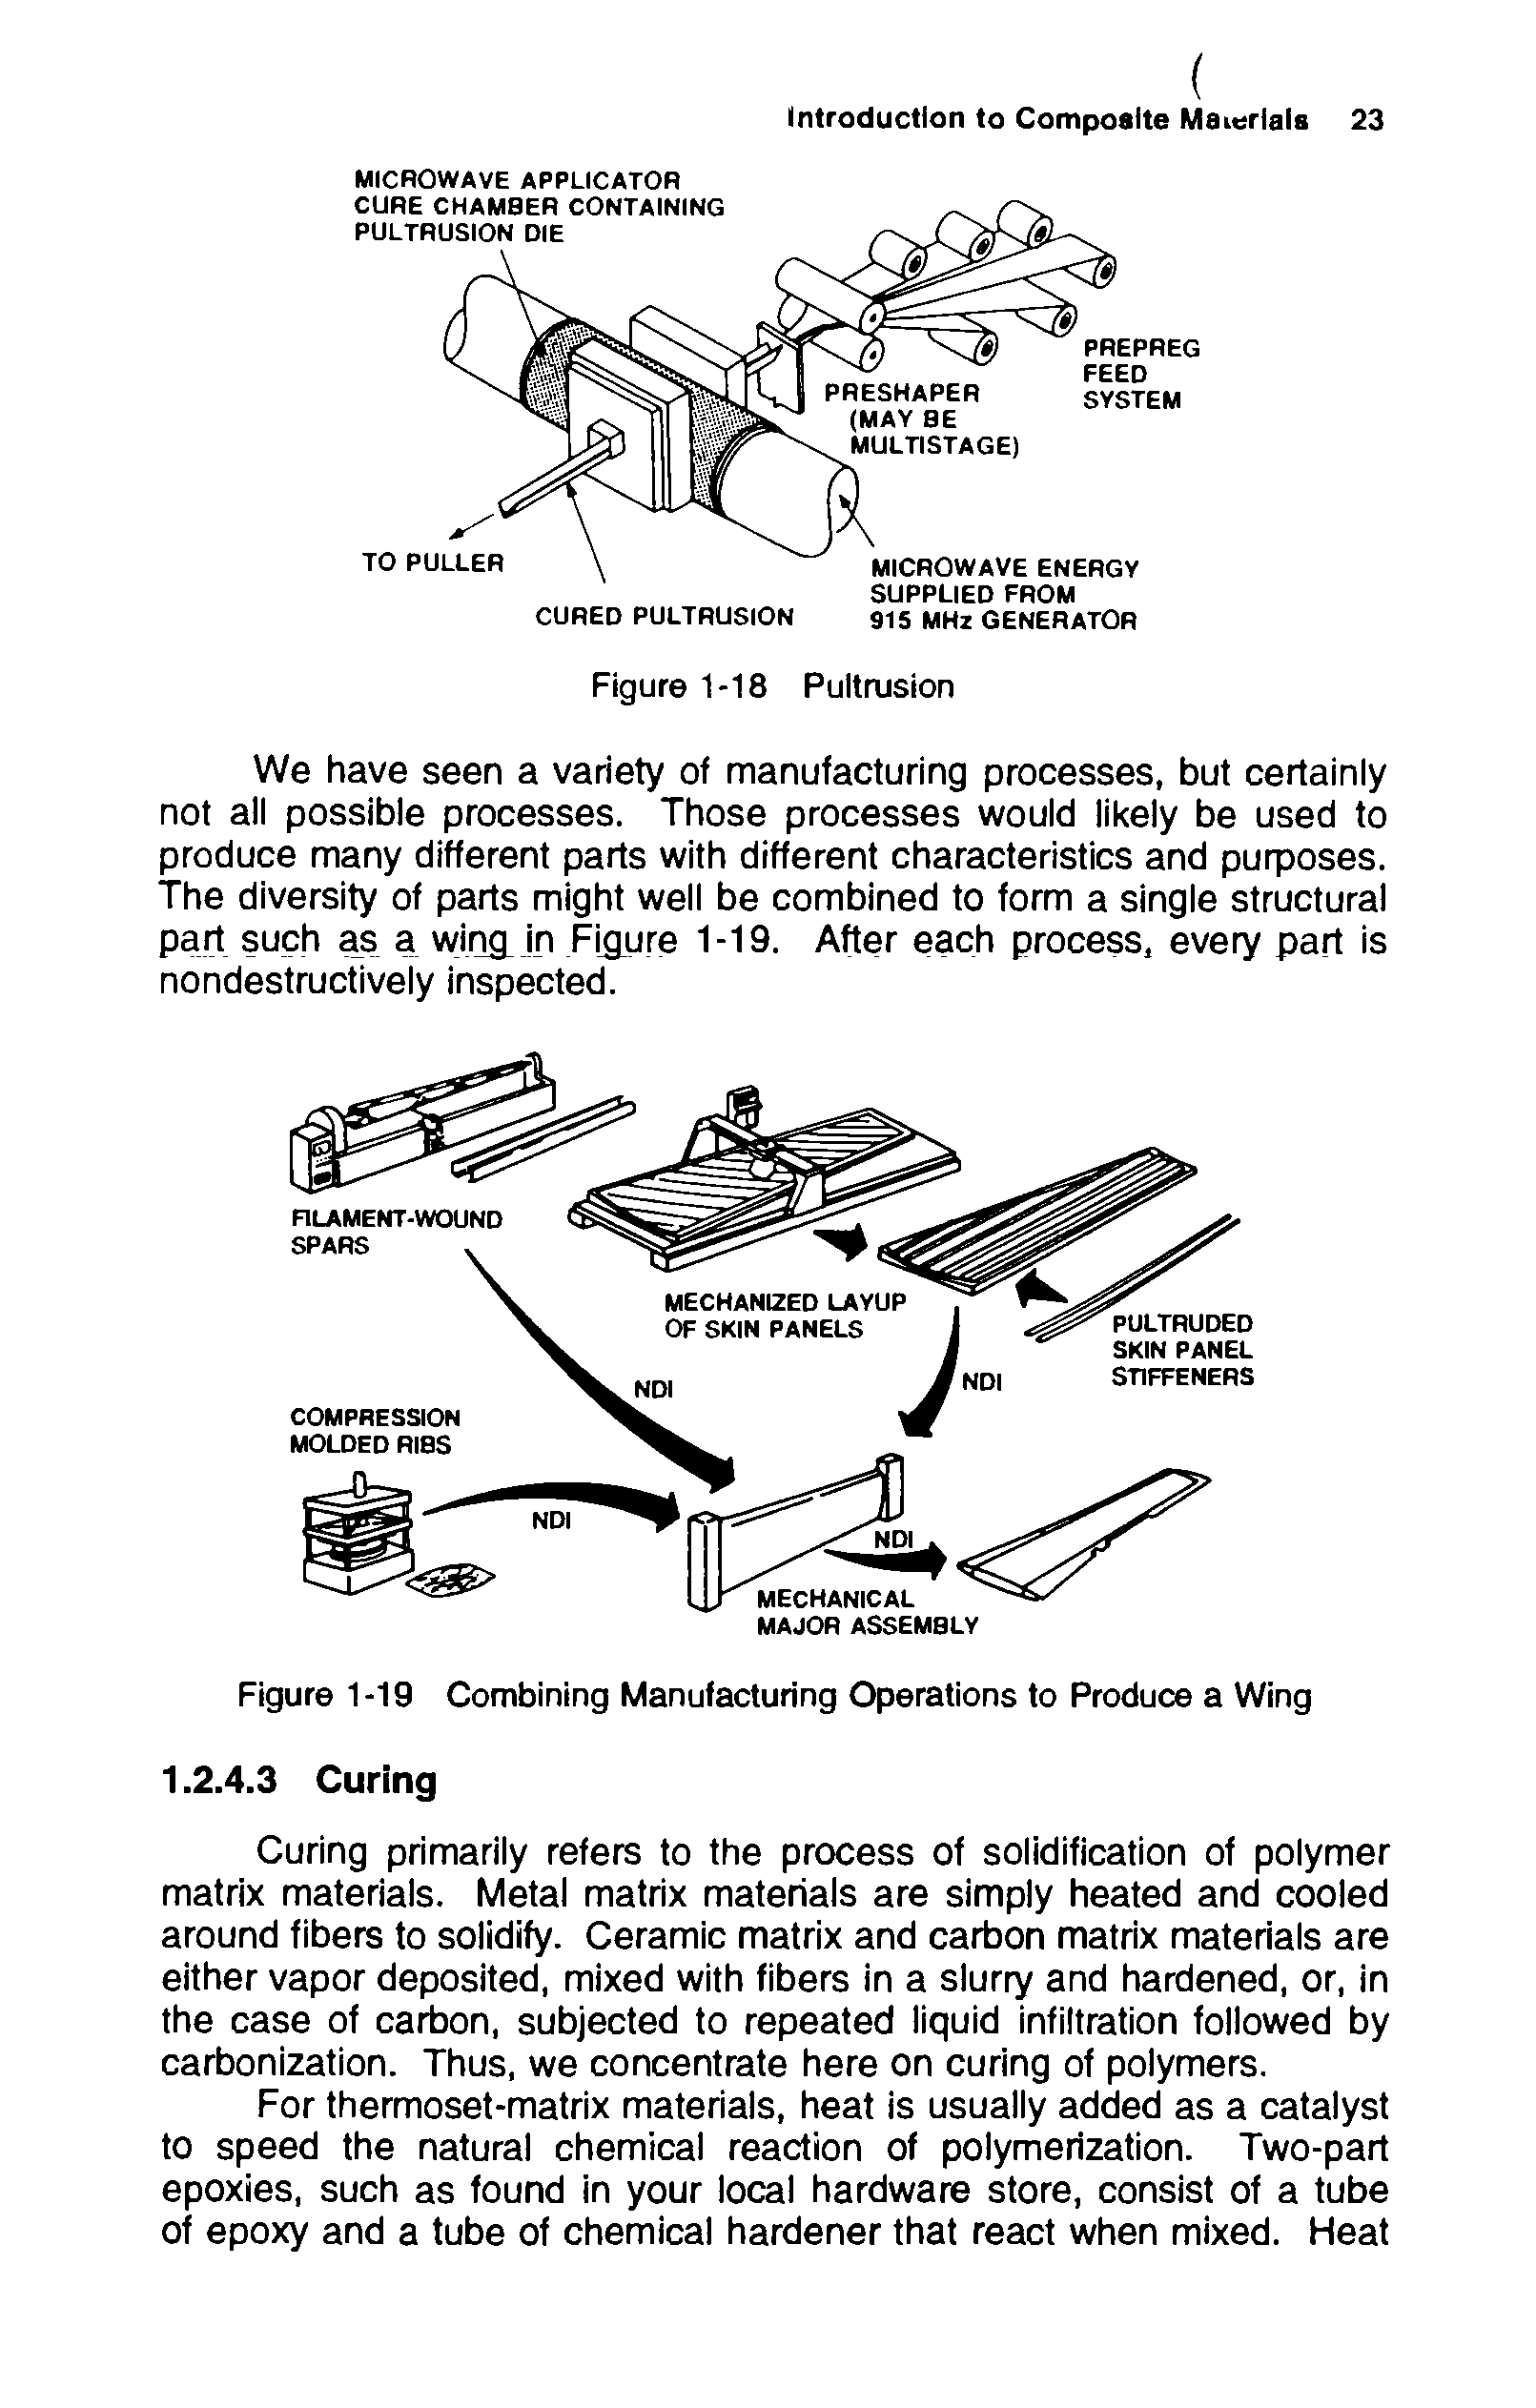 Figure 1-19 Combining Manufacturing Operations to Produce a Wing...